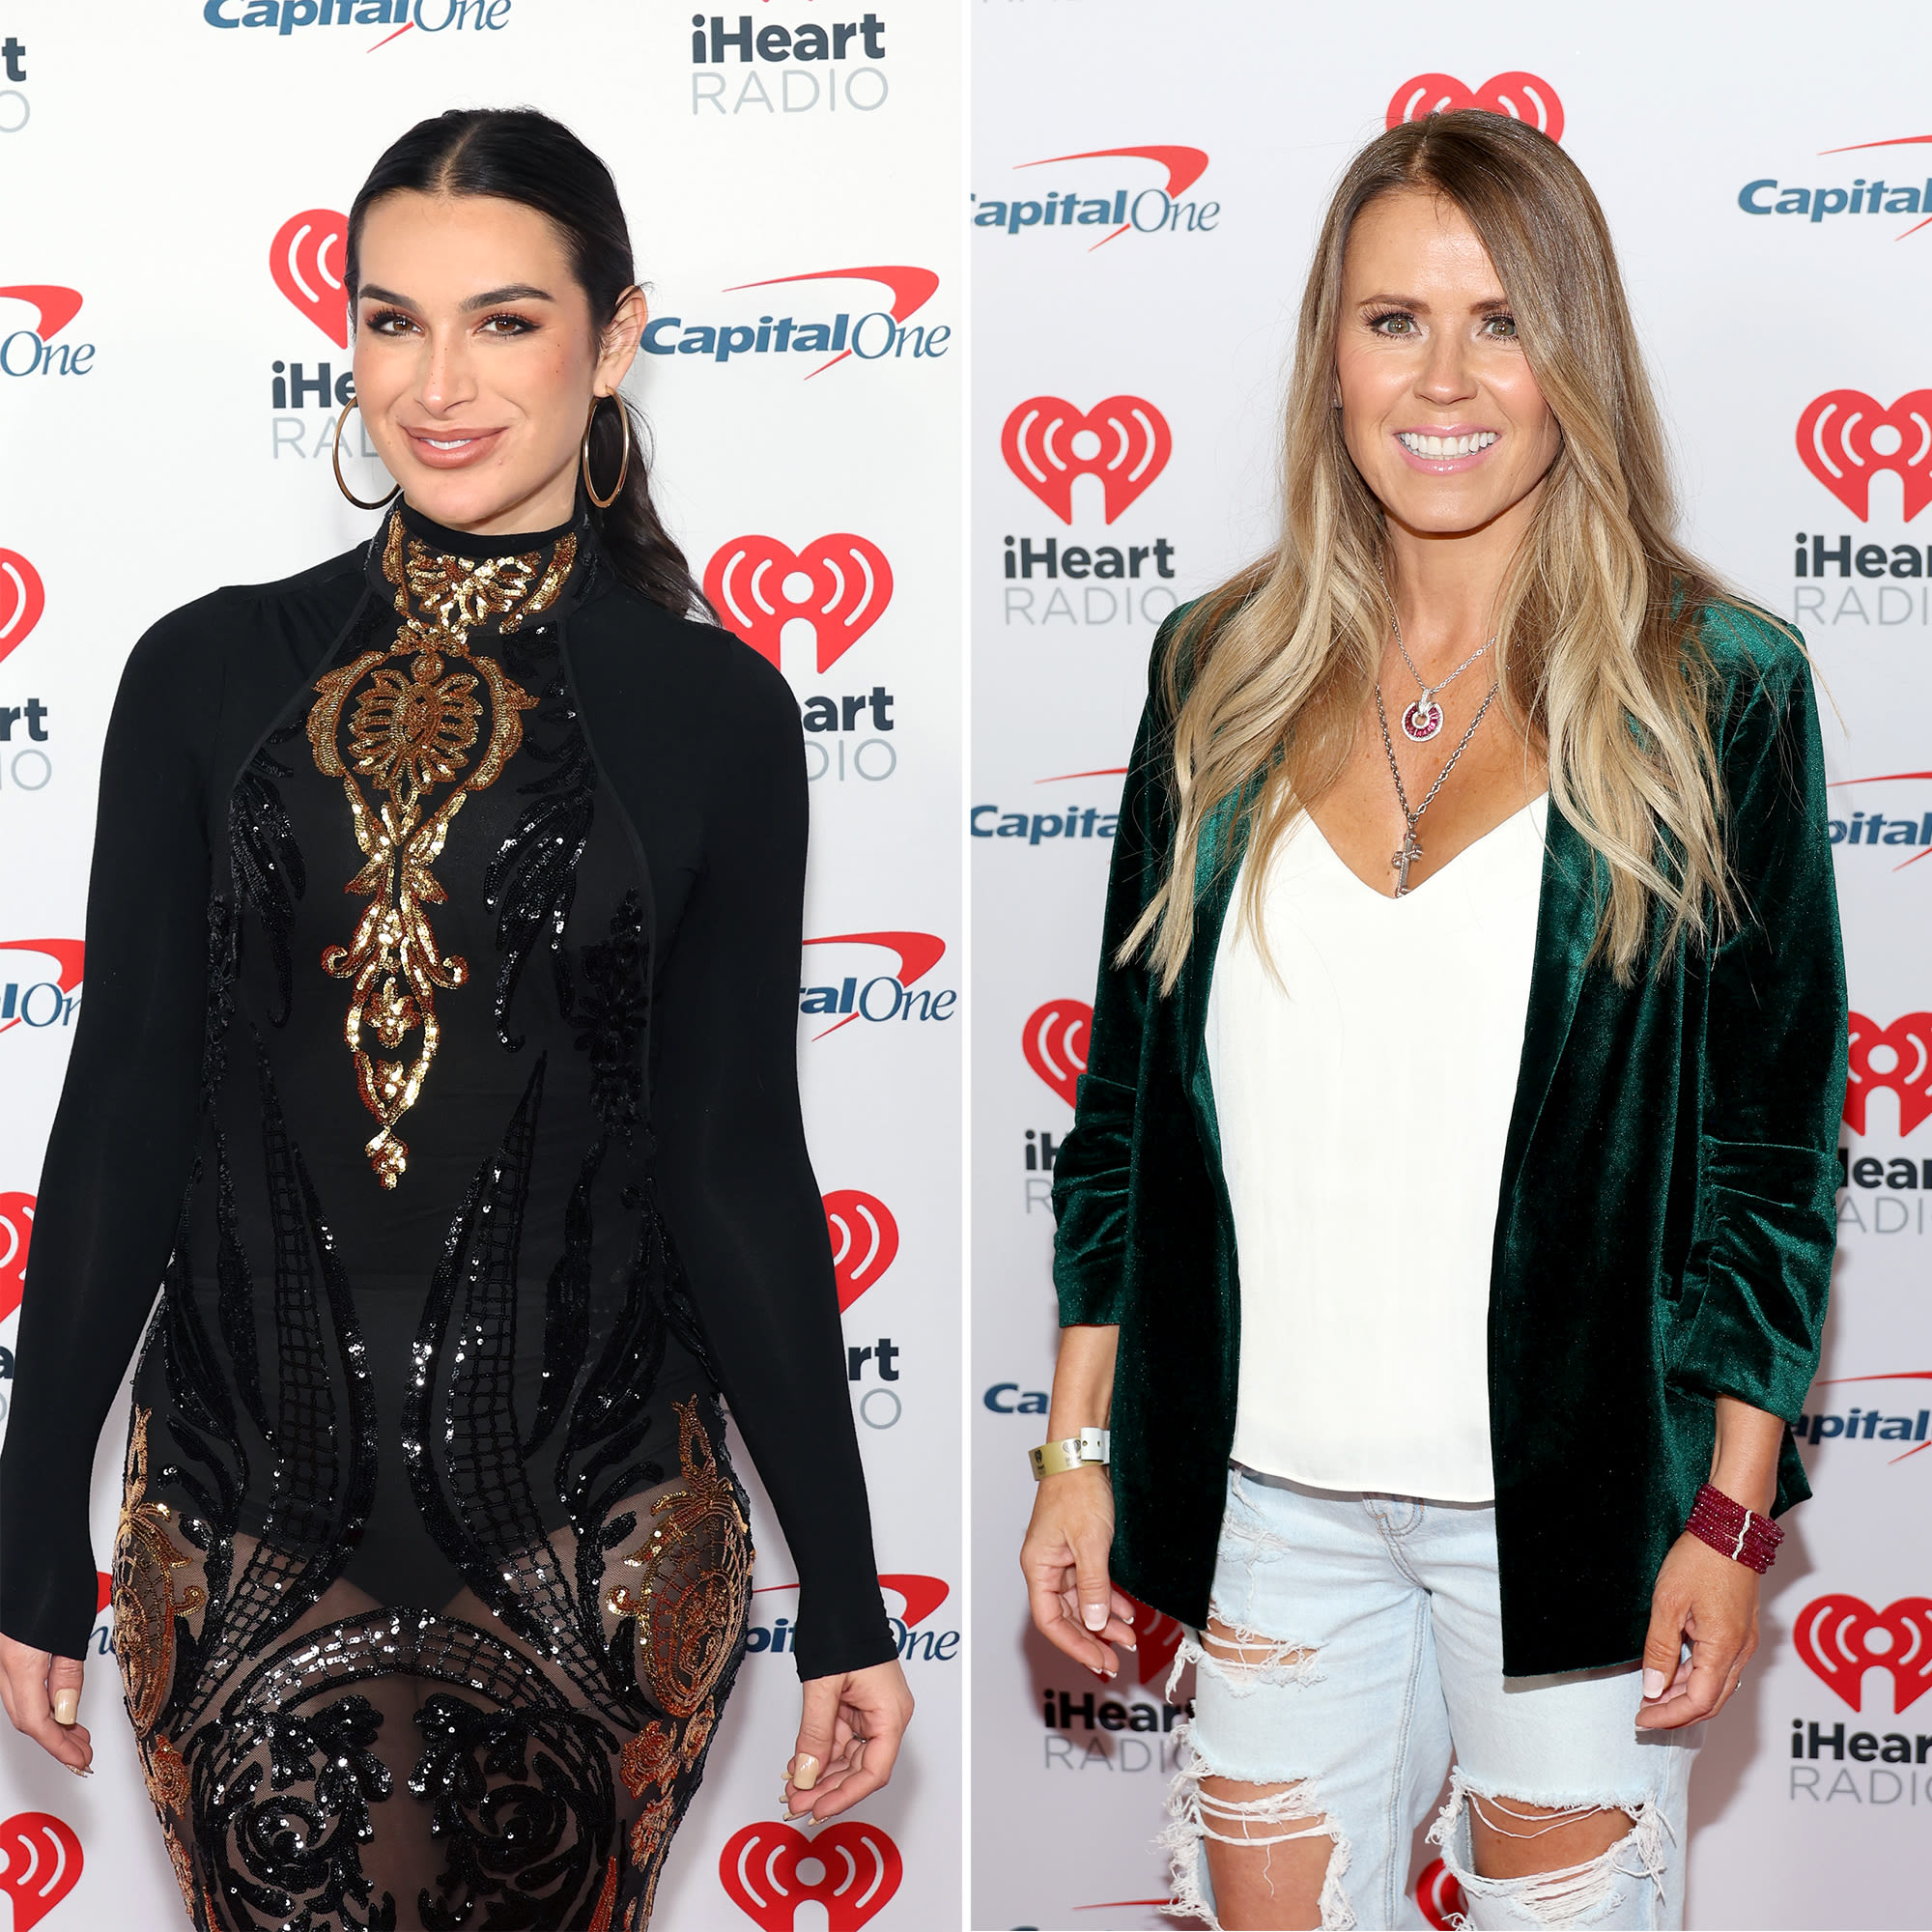 Ashley Iaconetti Thinks Trista Sutter ‘Basically Revealed’ Her Involvement With ‘Special Forces’